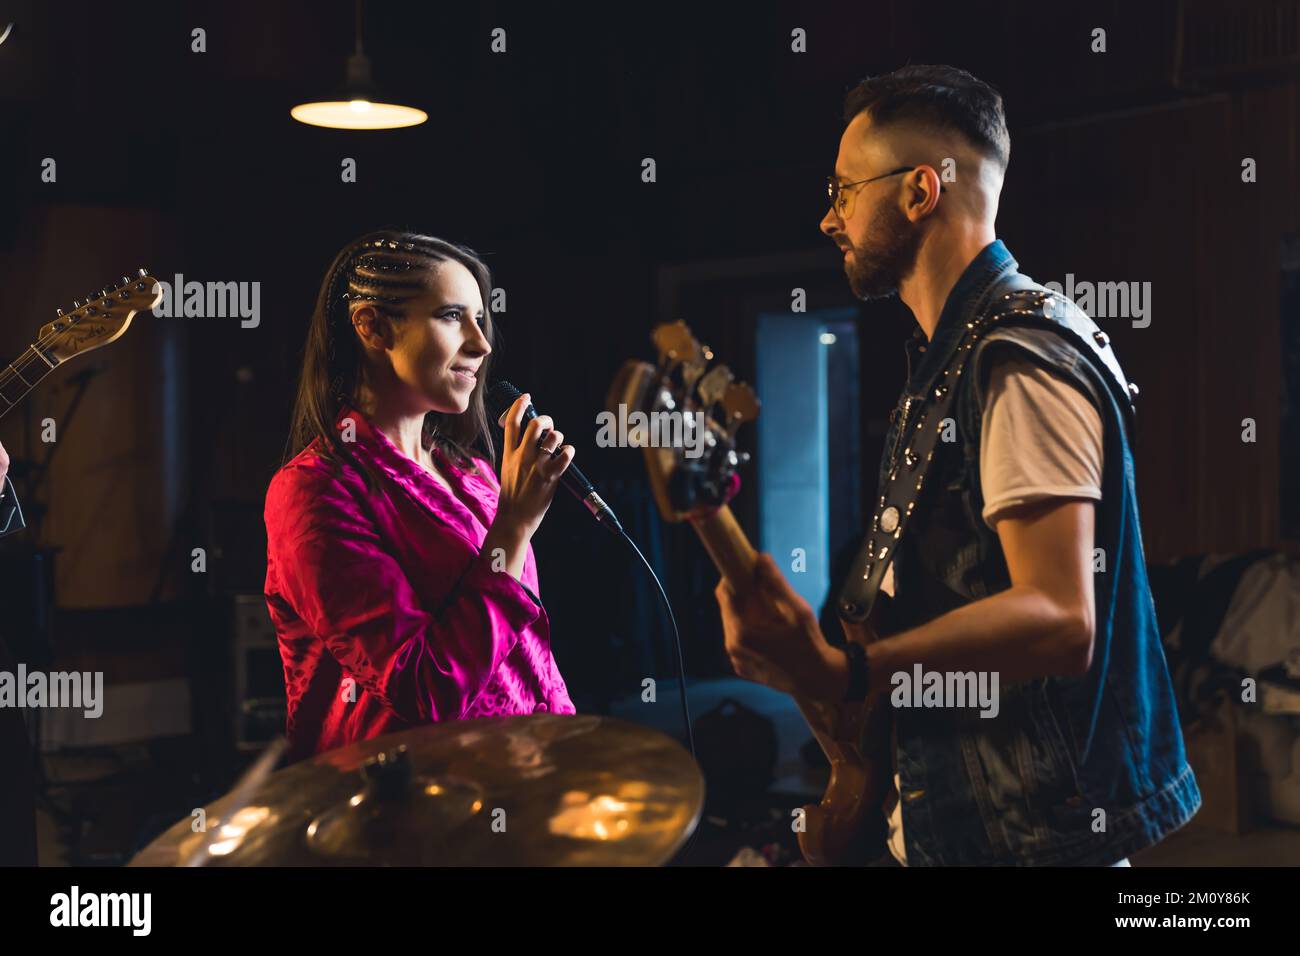 Woman singing with the music band playing guitars and drums, accompanying her. High quality photo Stock Photo